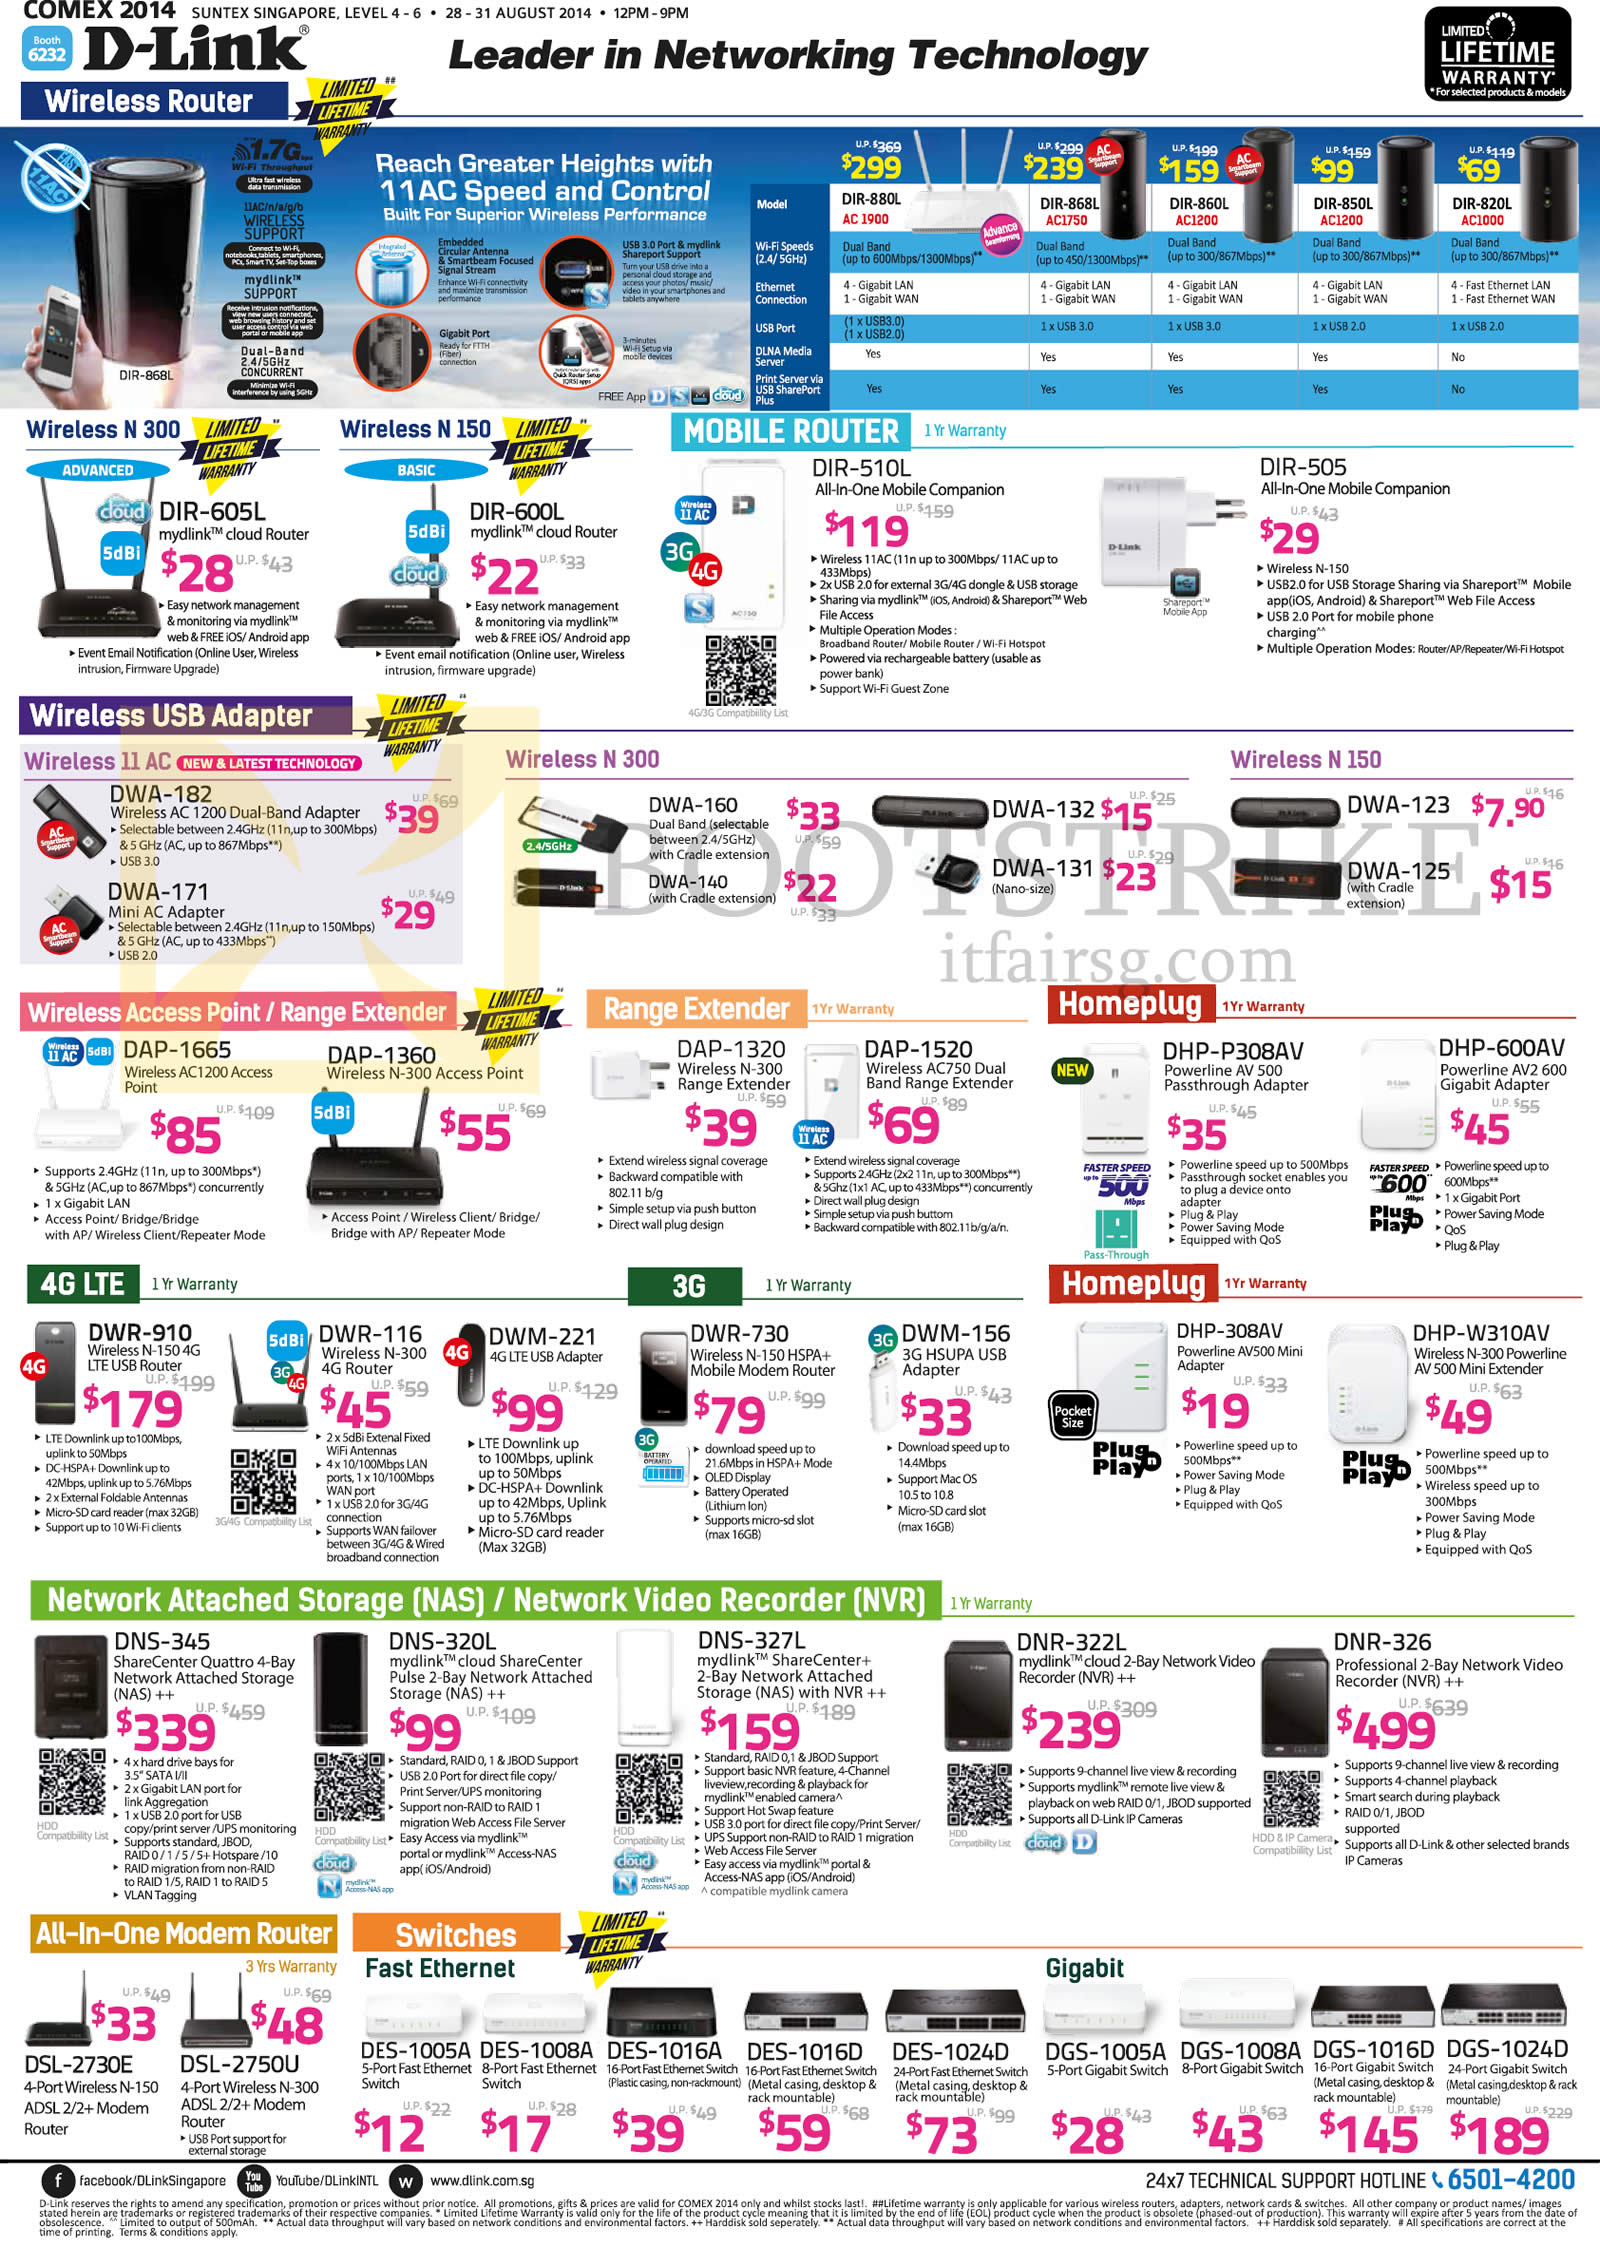 COMEX 2014 price list image brochure of D-Link Networking Mobile Wireless Router, USB Adapter, Range Extender, HomePlug, NAS, NVR, Switches, AIO Modem Router